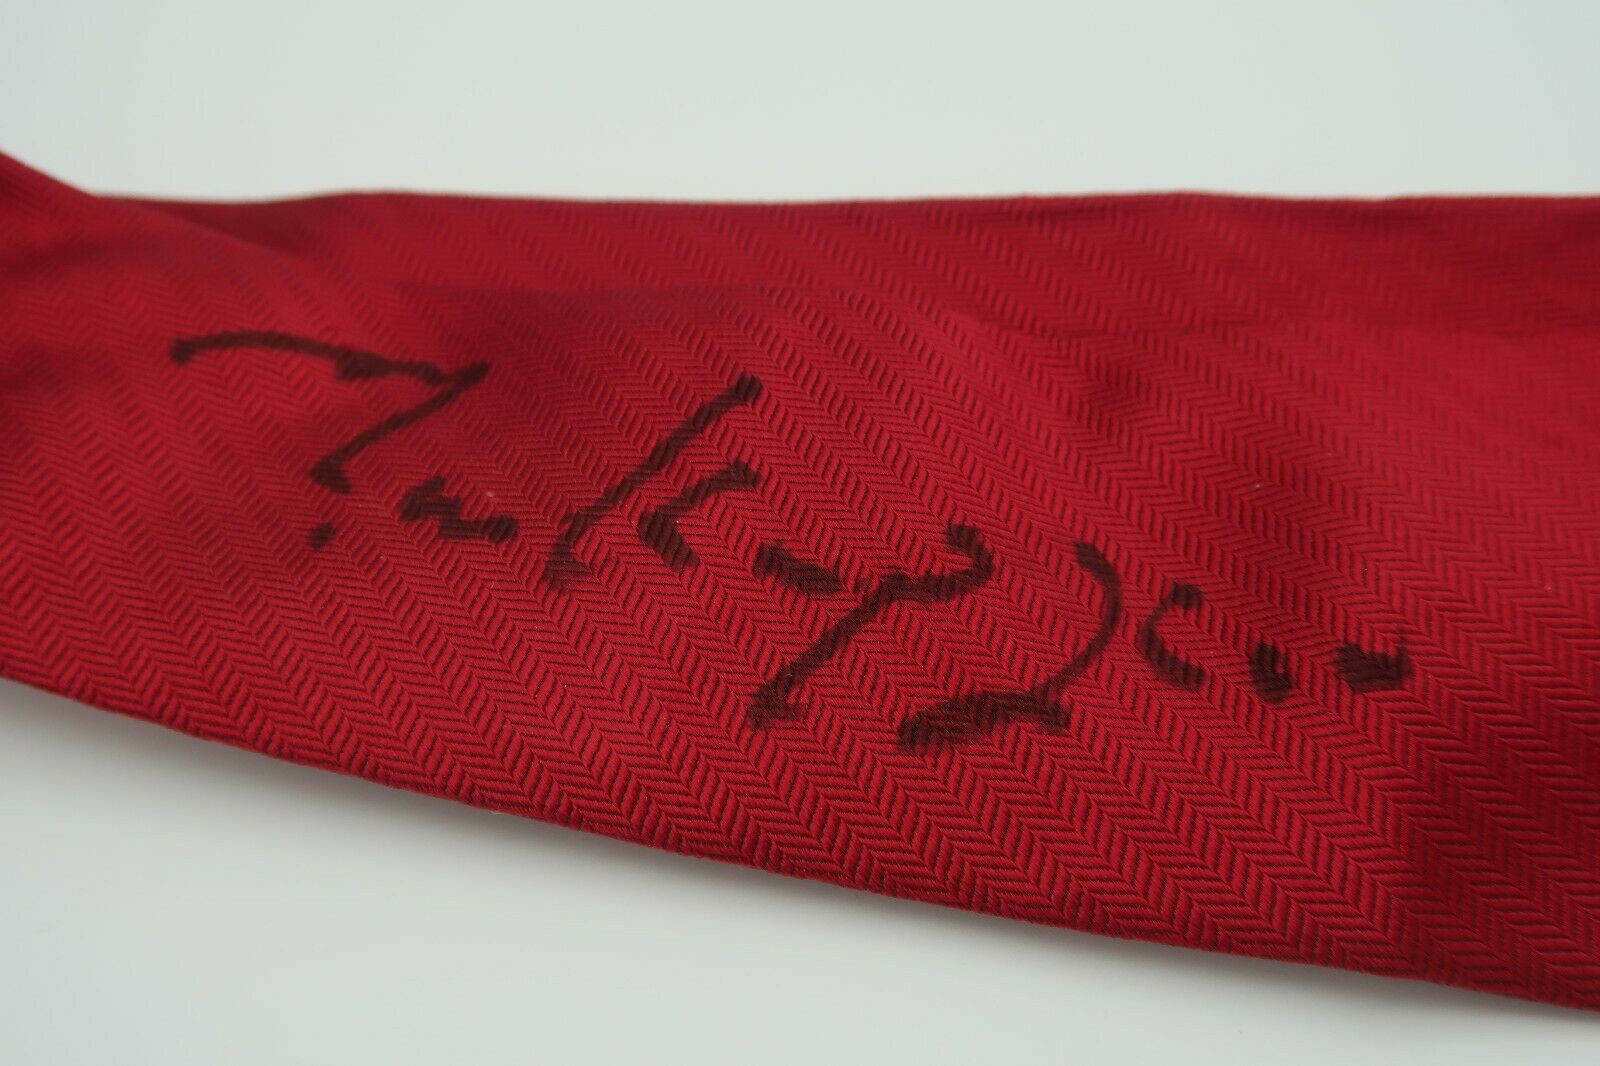 Mark Knopfler’s Red Tie Is On Auction!